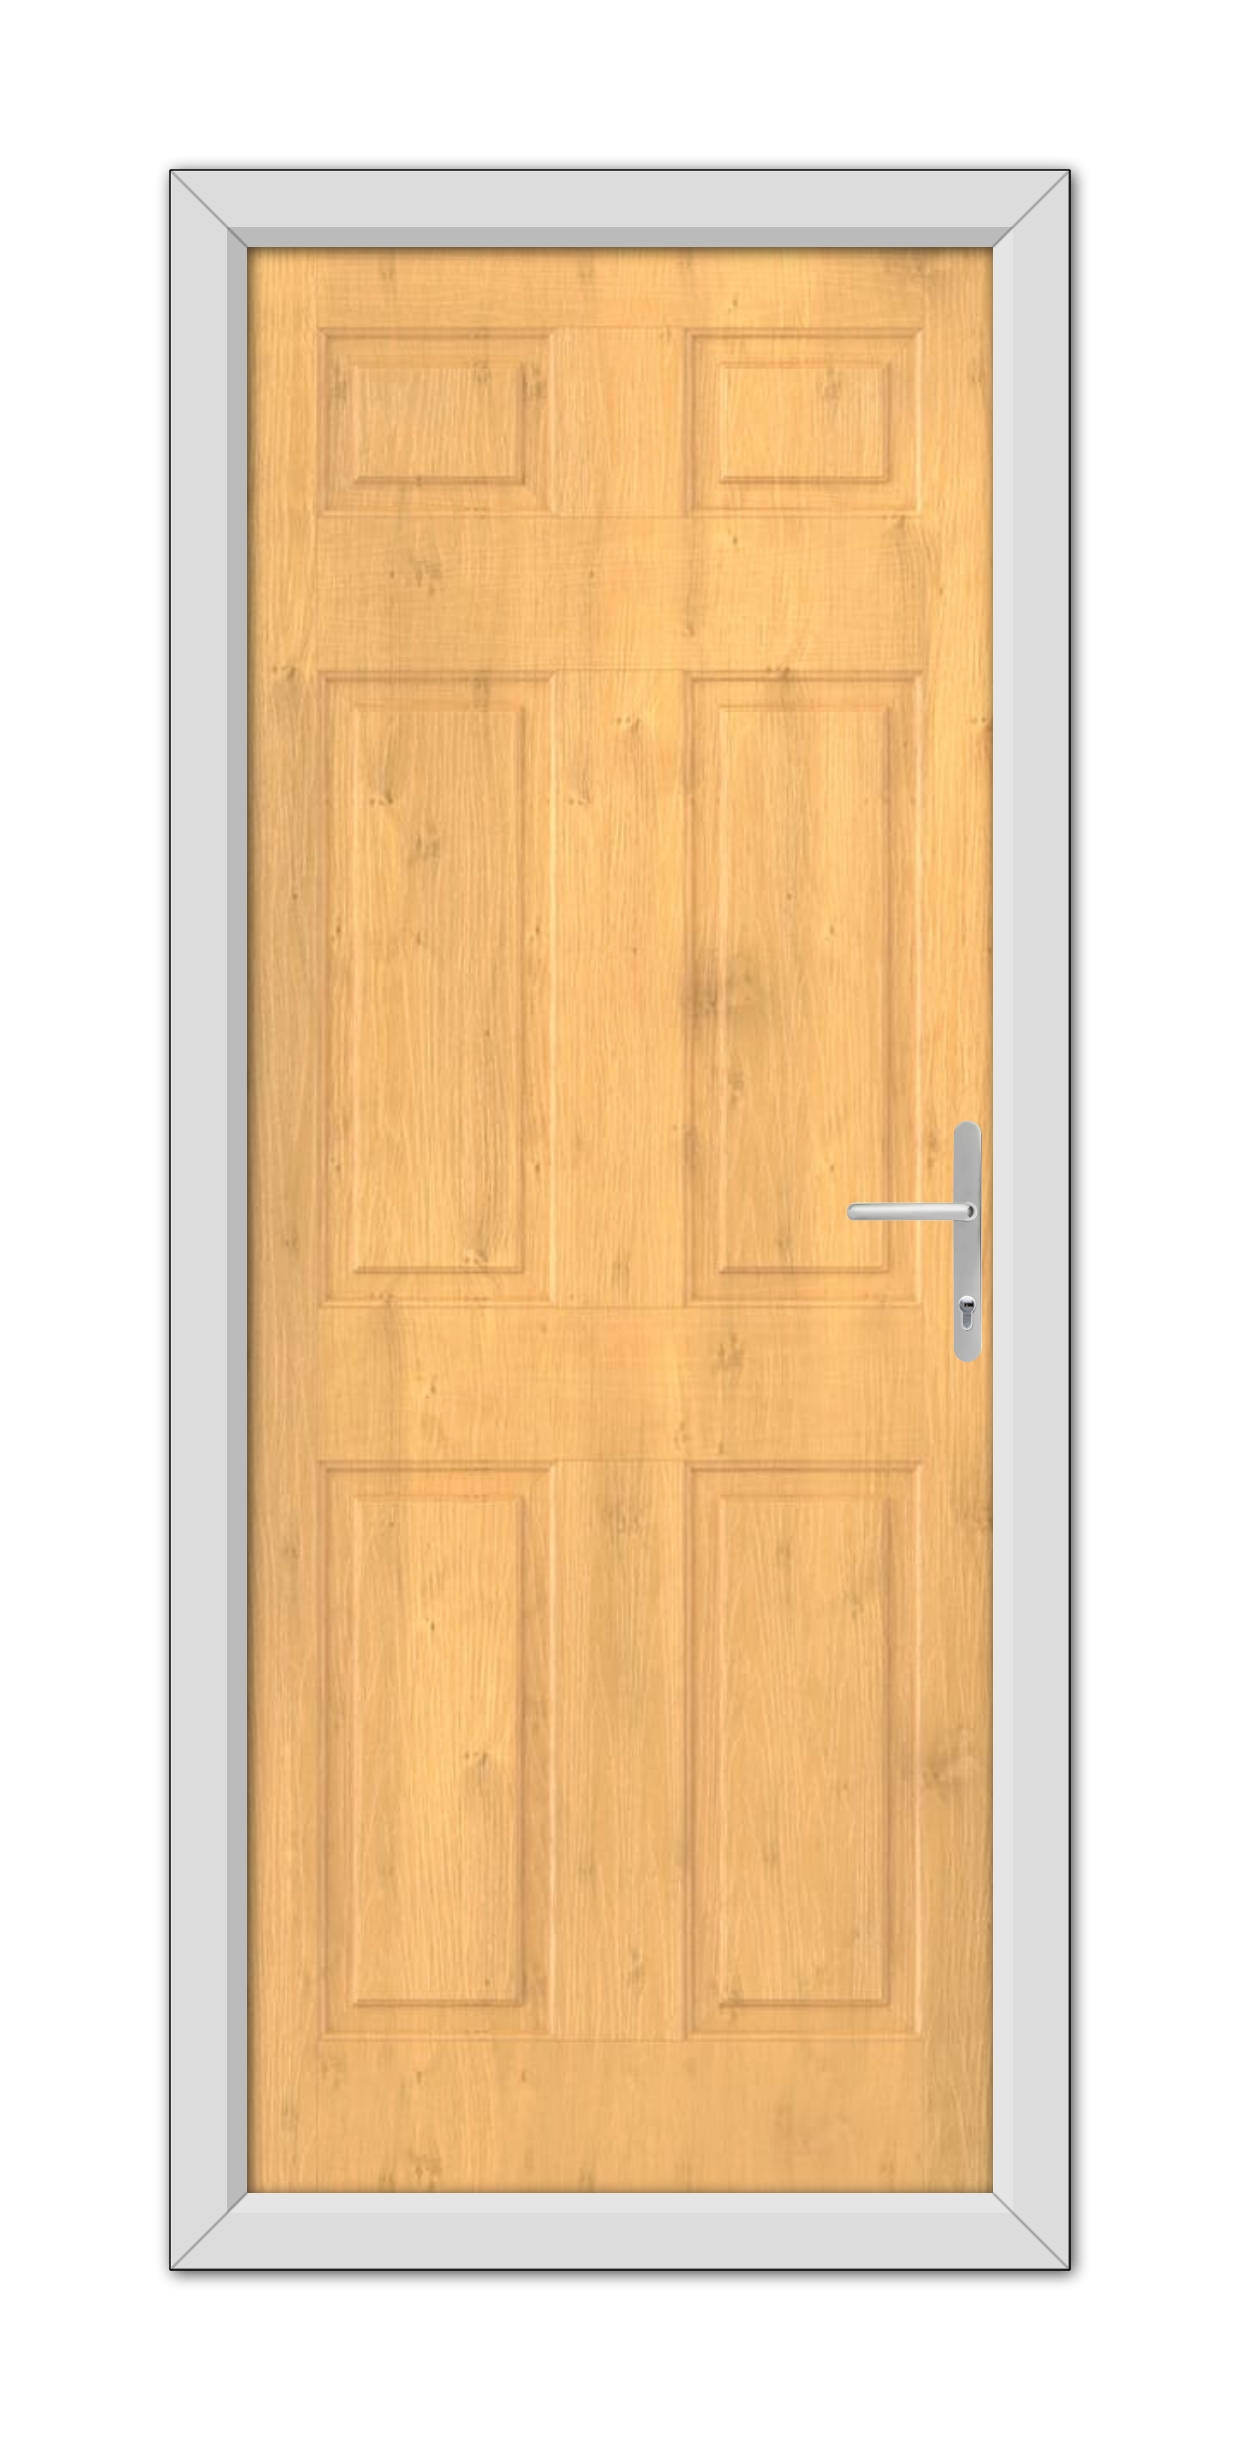 An Irish Oak Middleton Solid Composite Door 48mm Timber Core with a metal handle, set in a gray frame, displayed frontally.